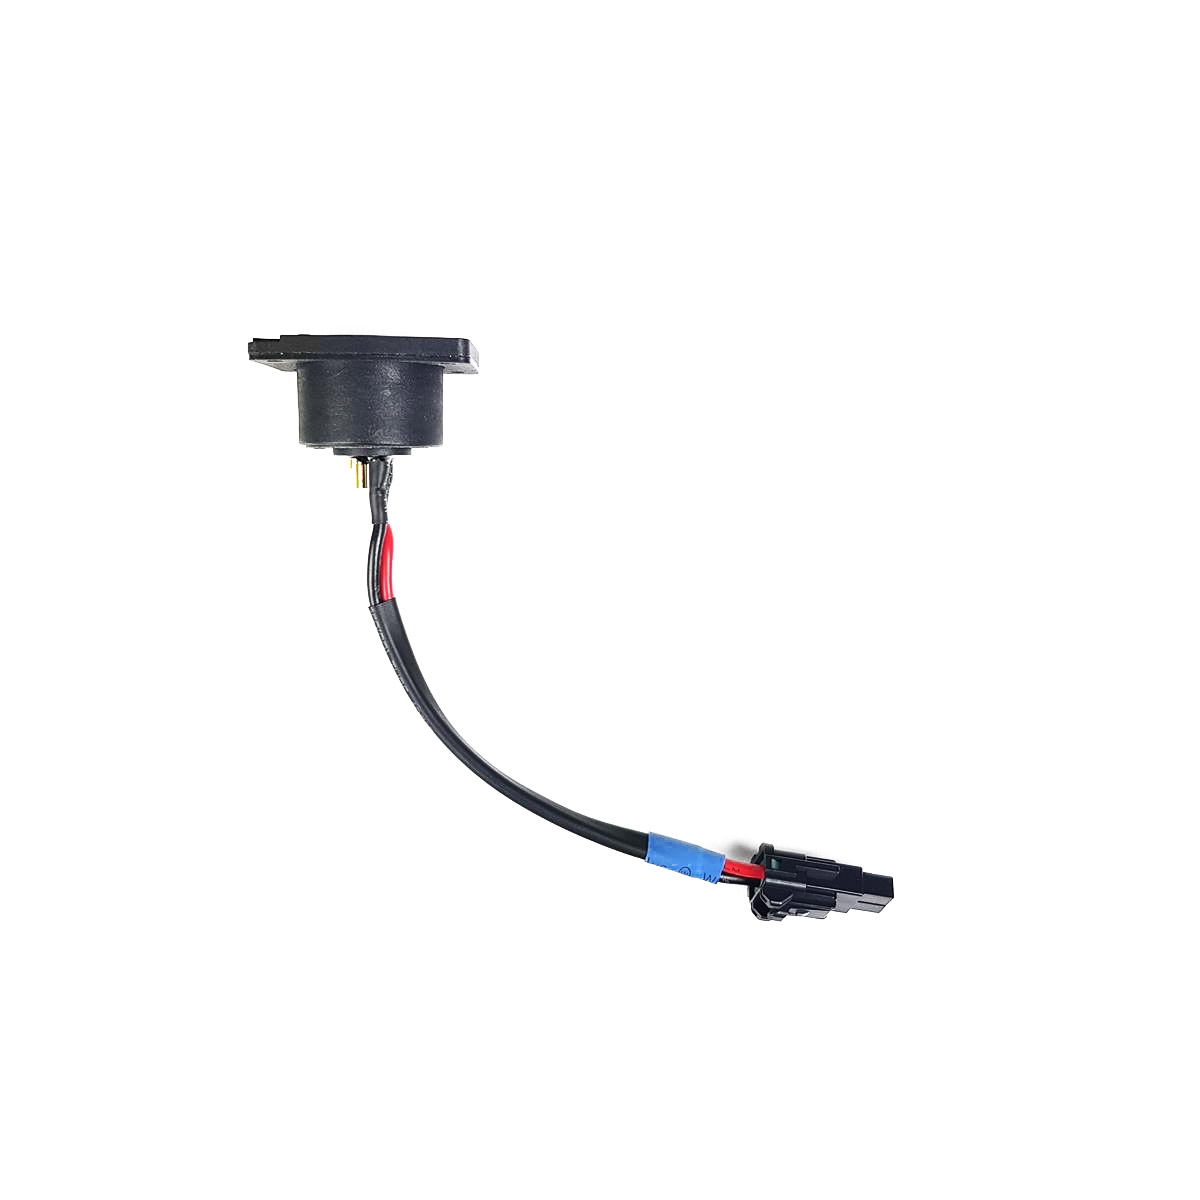 Replacement charging port 1977005EDS for Powerplay models